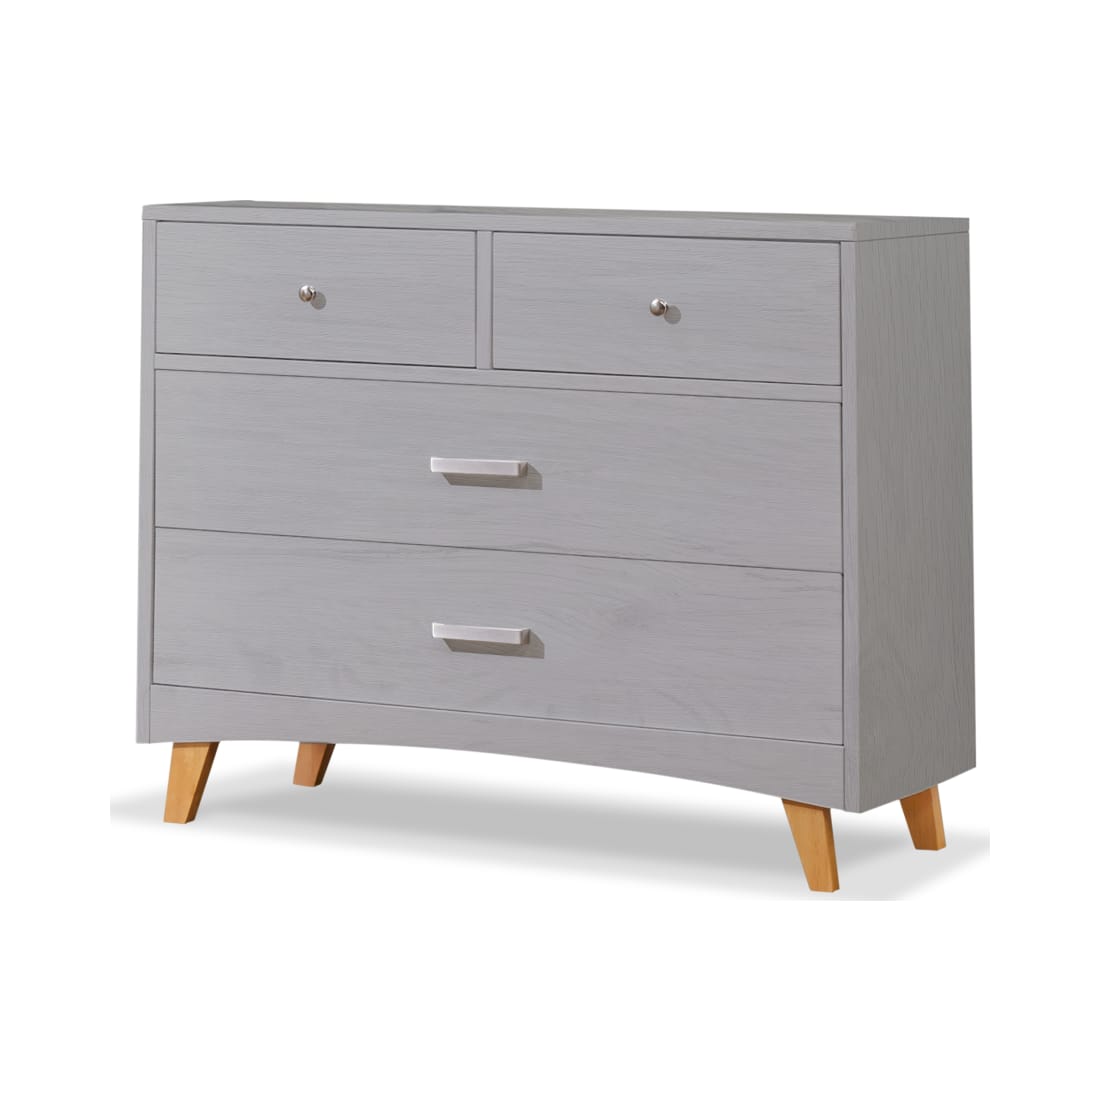 Sorelle Soho 4 Drawer Dresser - Weathered Gray and Natural Wood